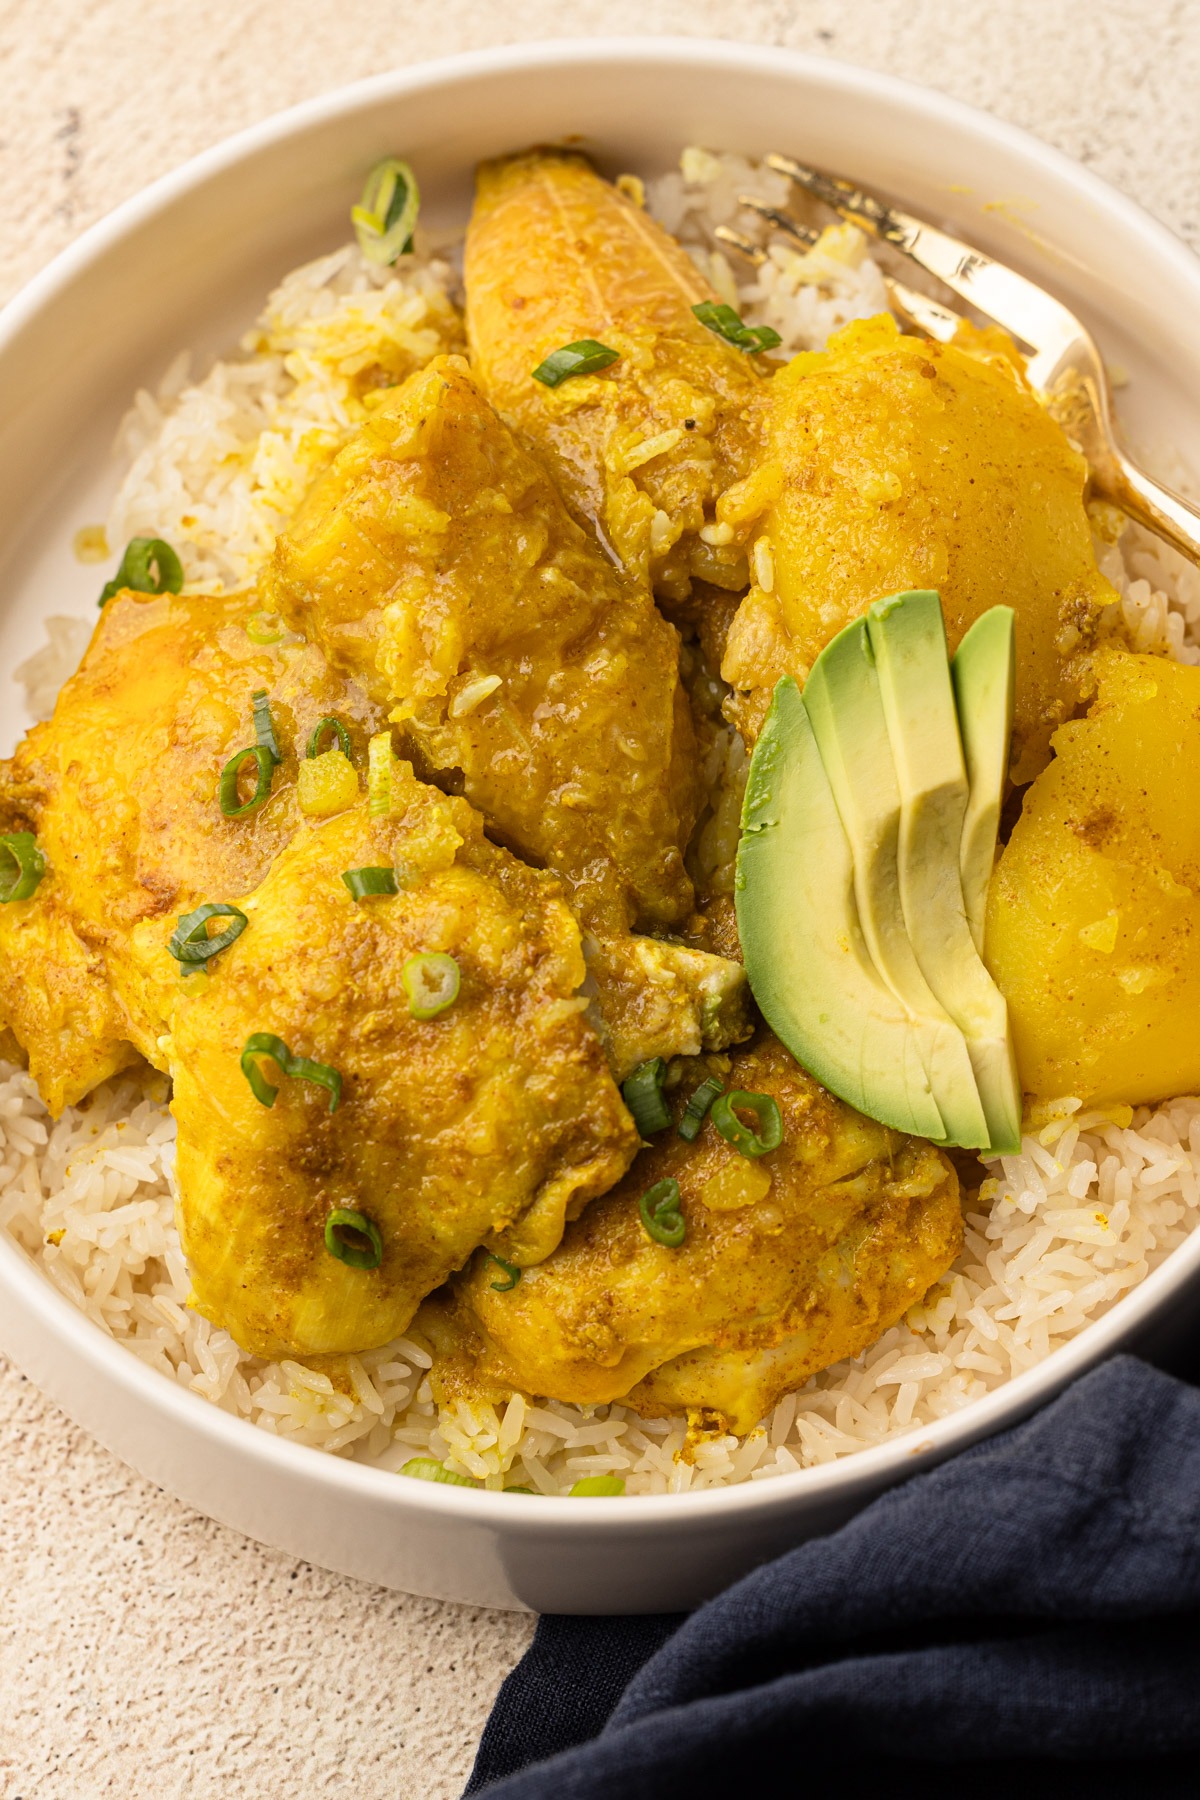 A plate of colombian chicken stew with a garnish of green onions and avocado.